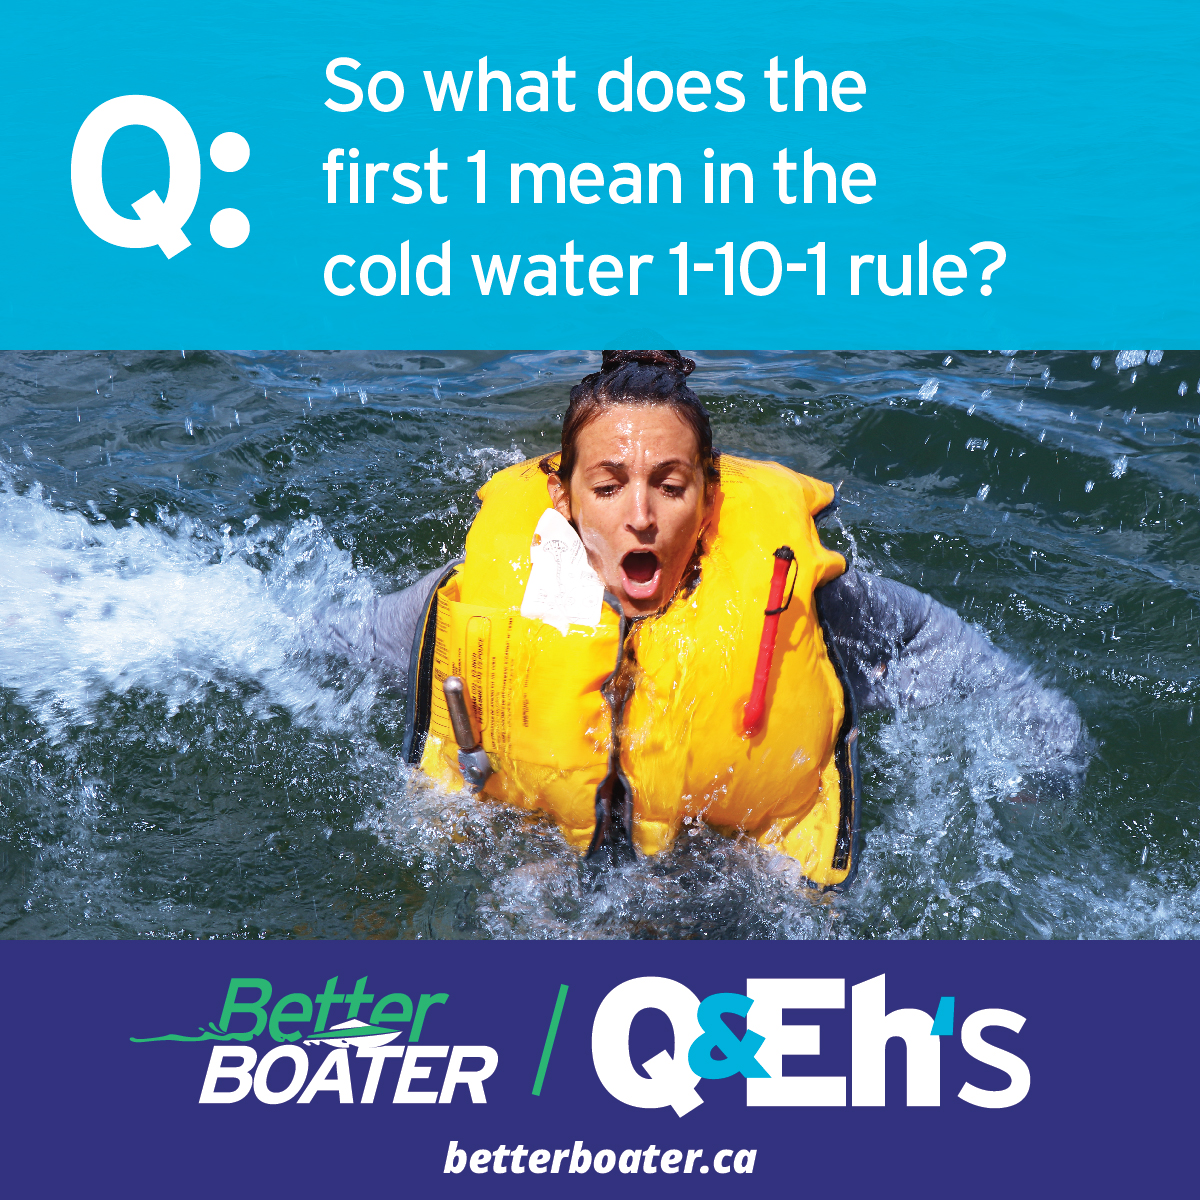 https://betterboater.ca/Cold%20Water%201-10-1